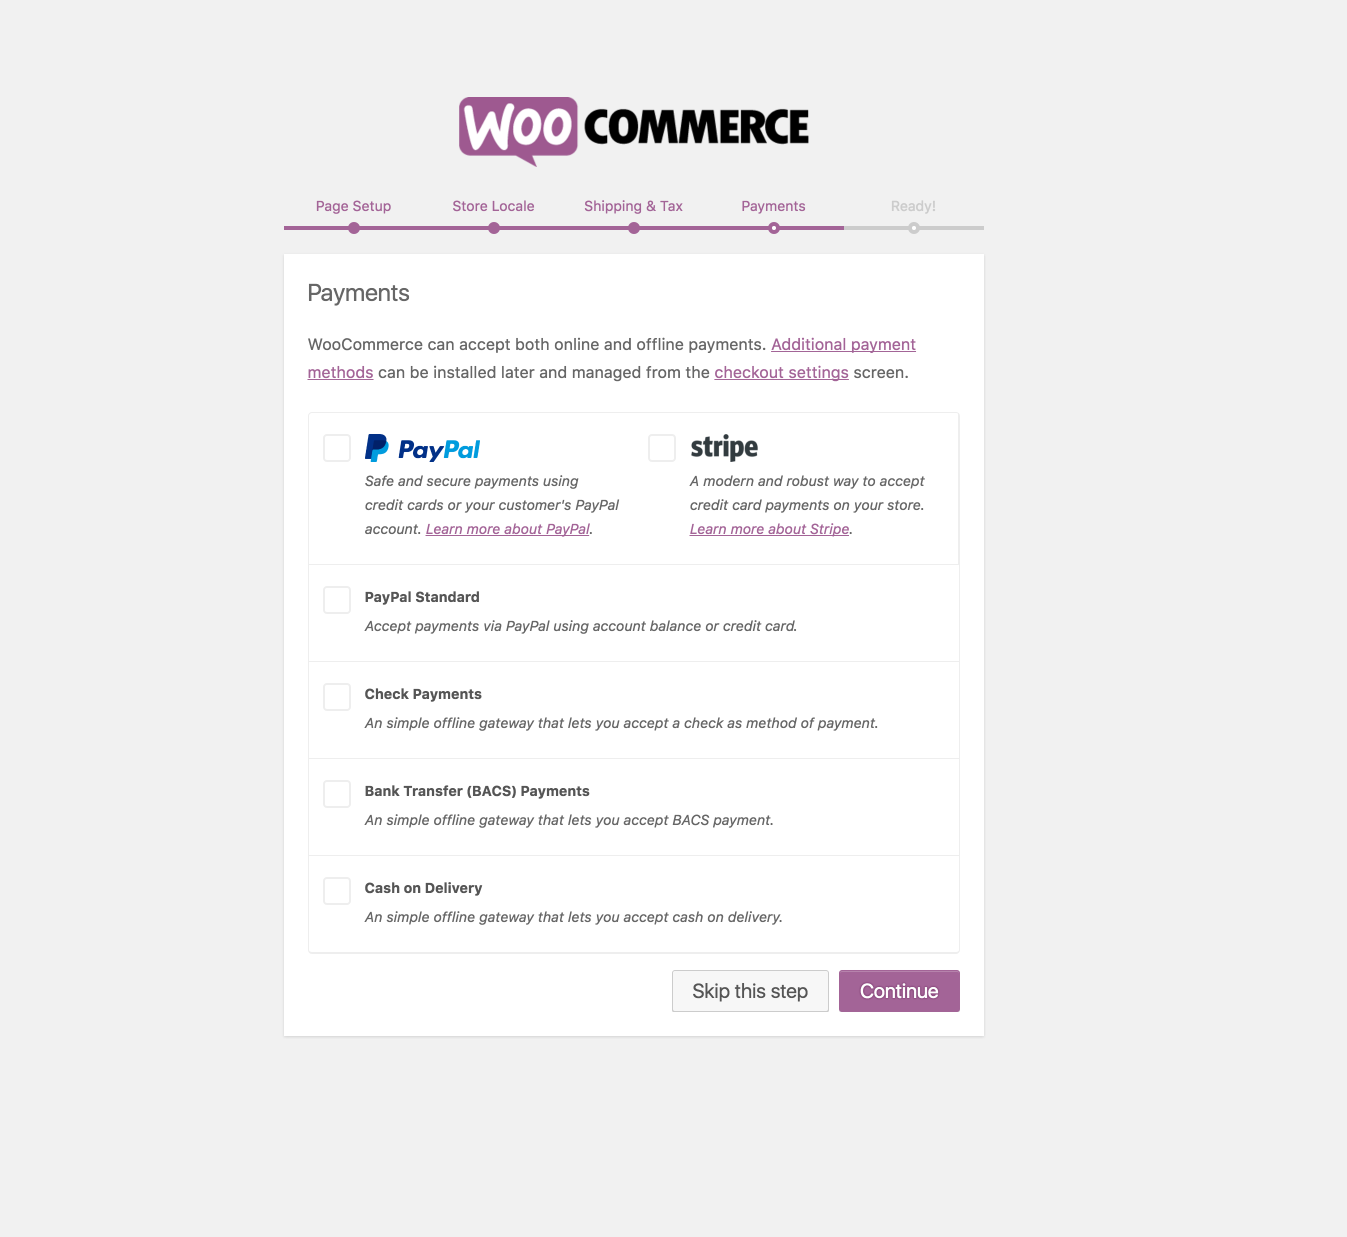 New payment options are now presented in the WooCommerce onboarding wizard.